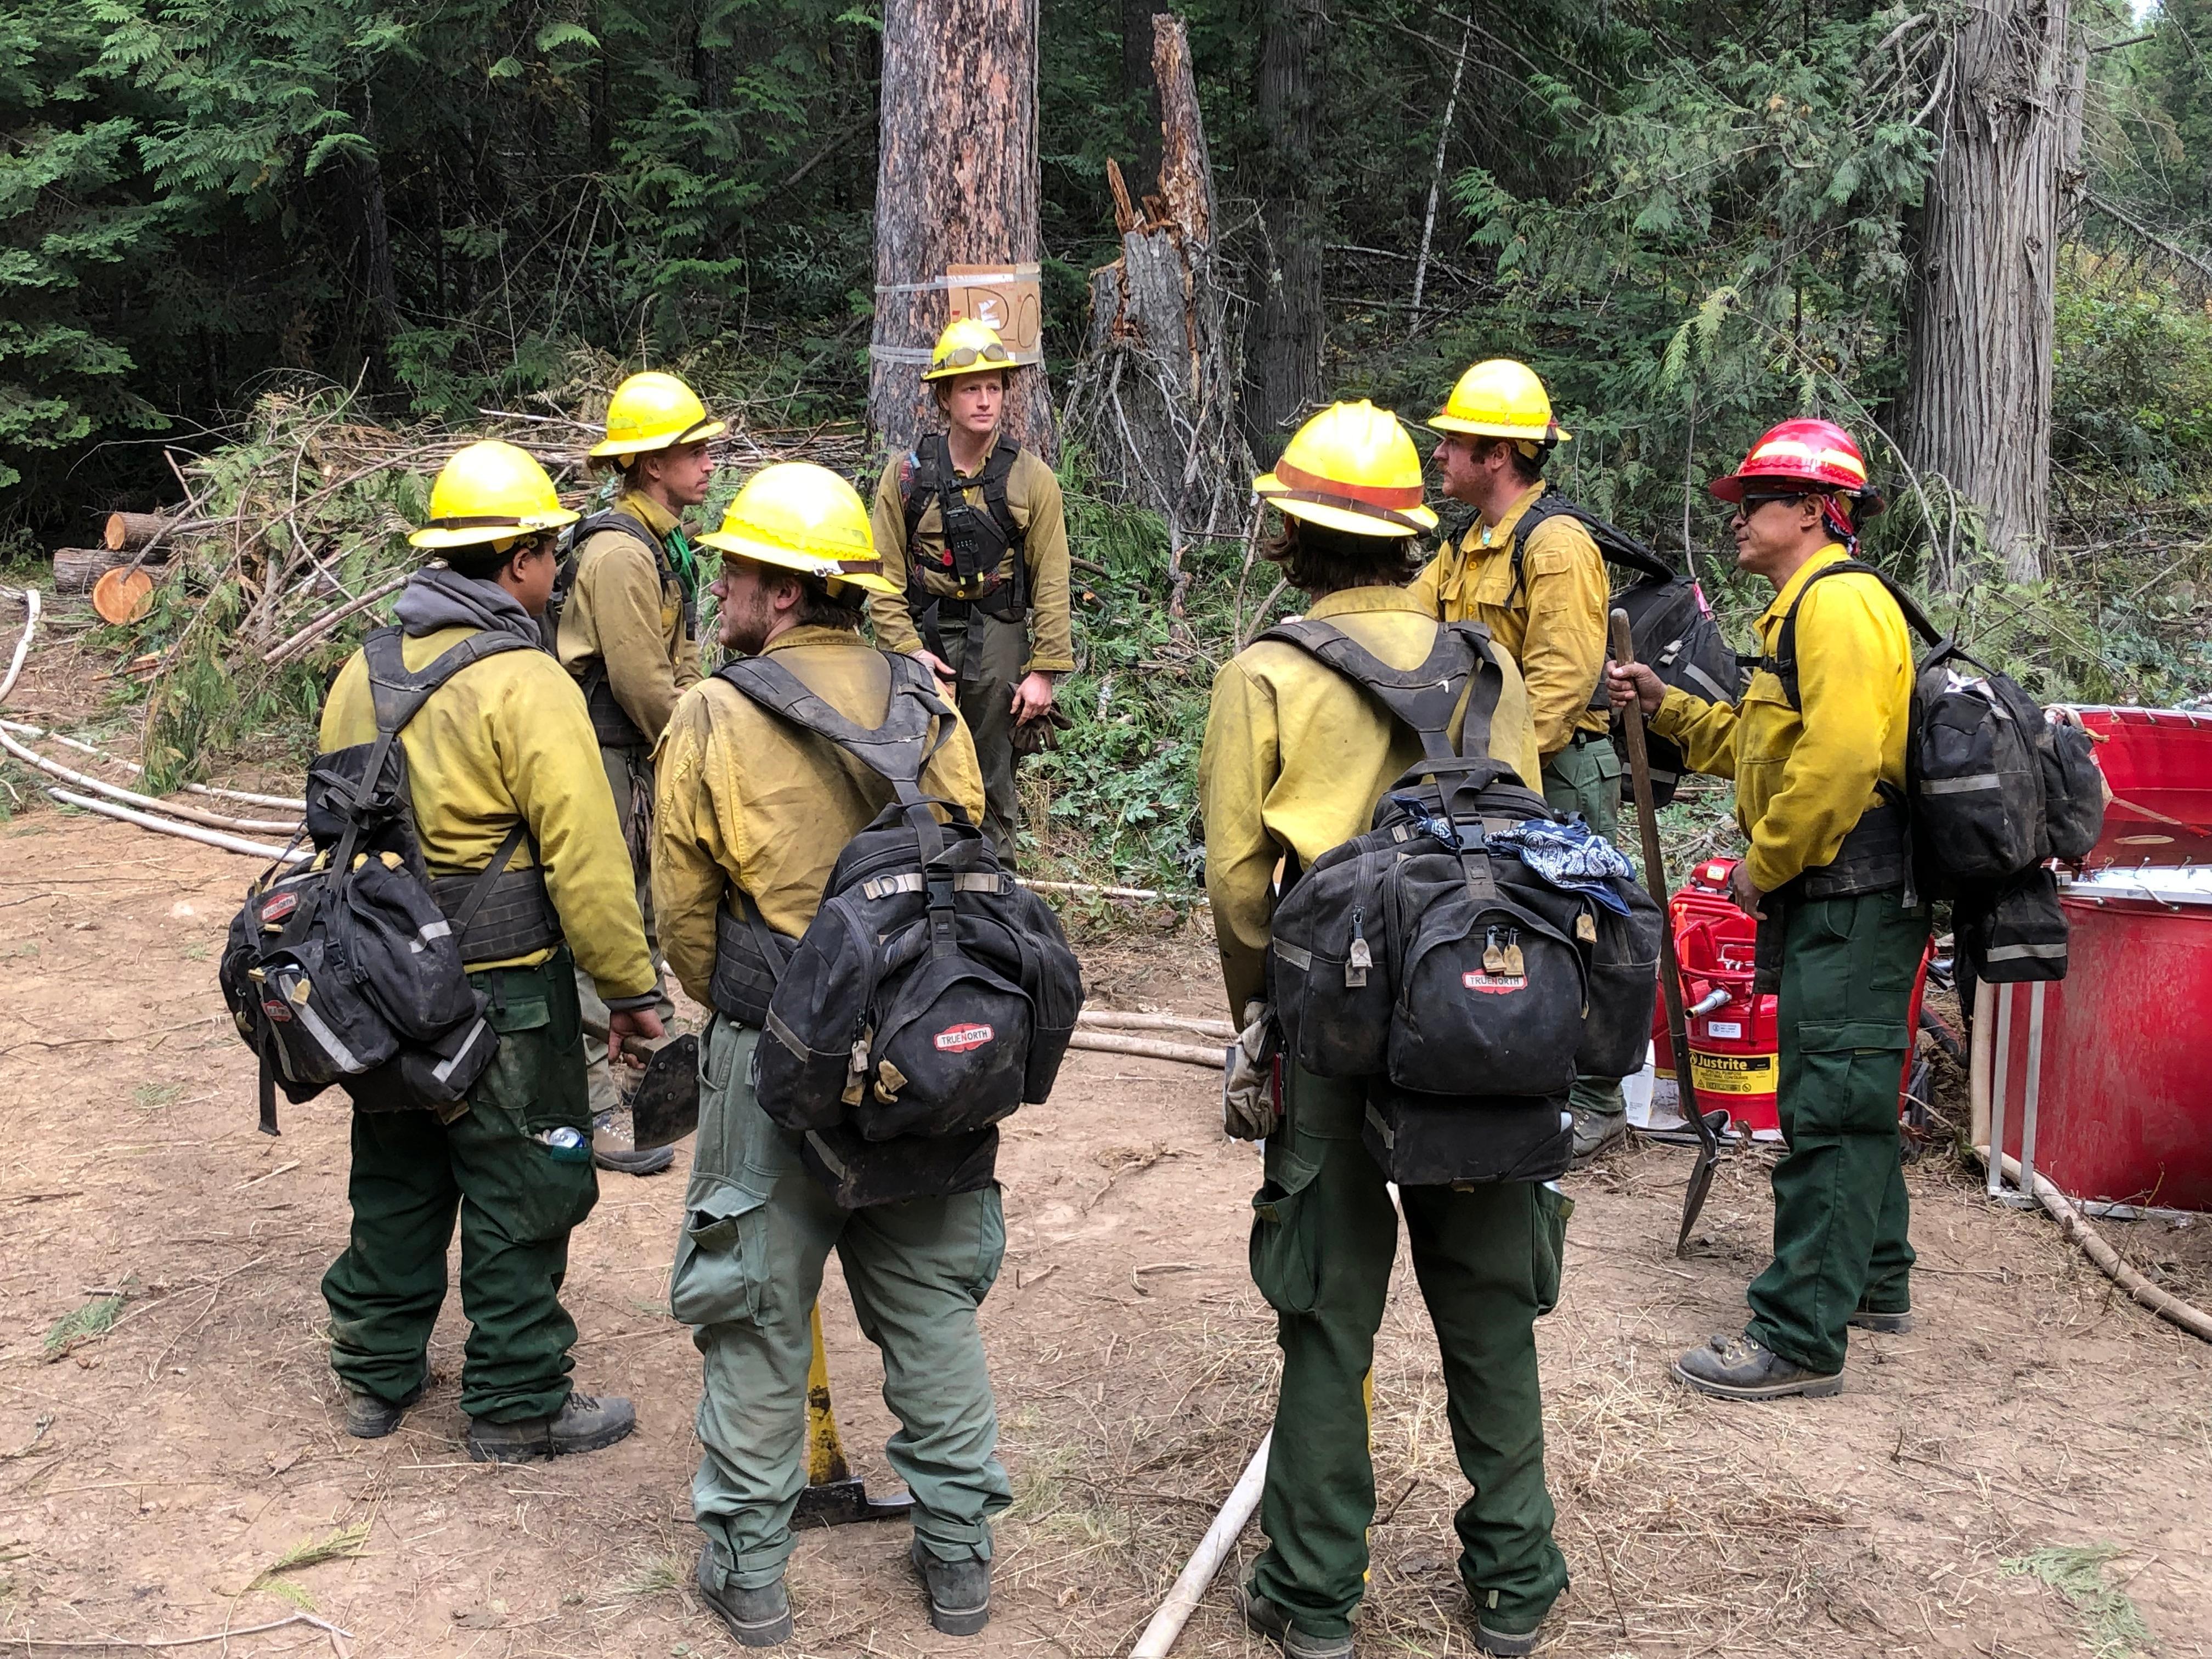 Crews meet before the days work to discuss plans, reinforce safety protocols, and prep for the days work. 